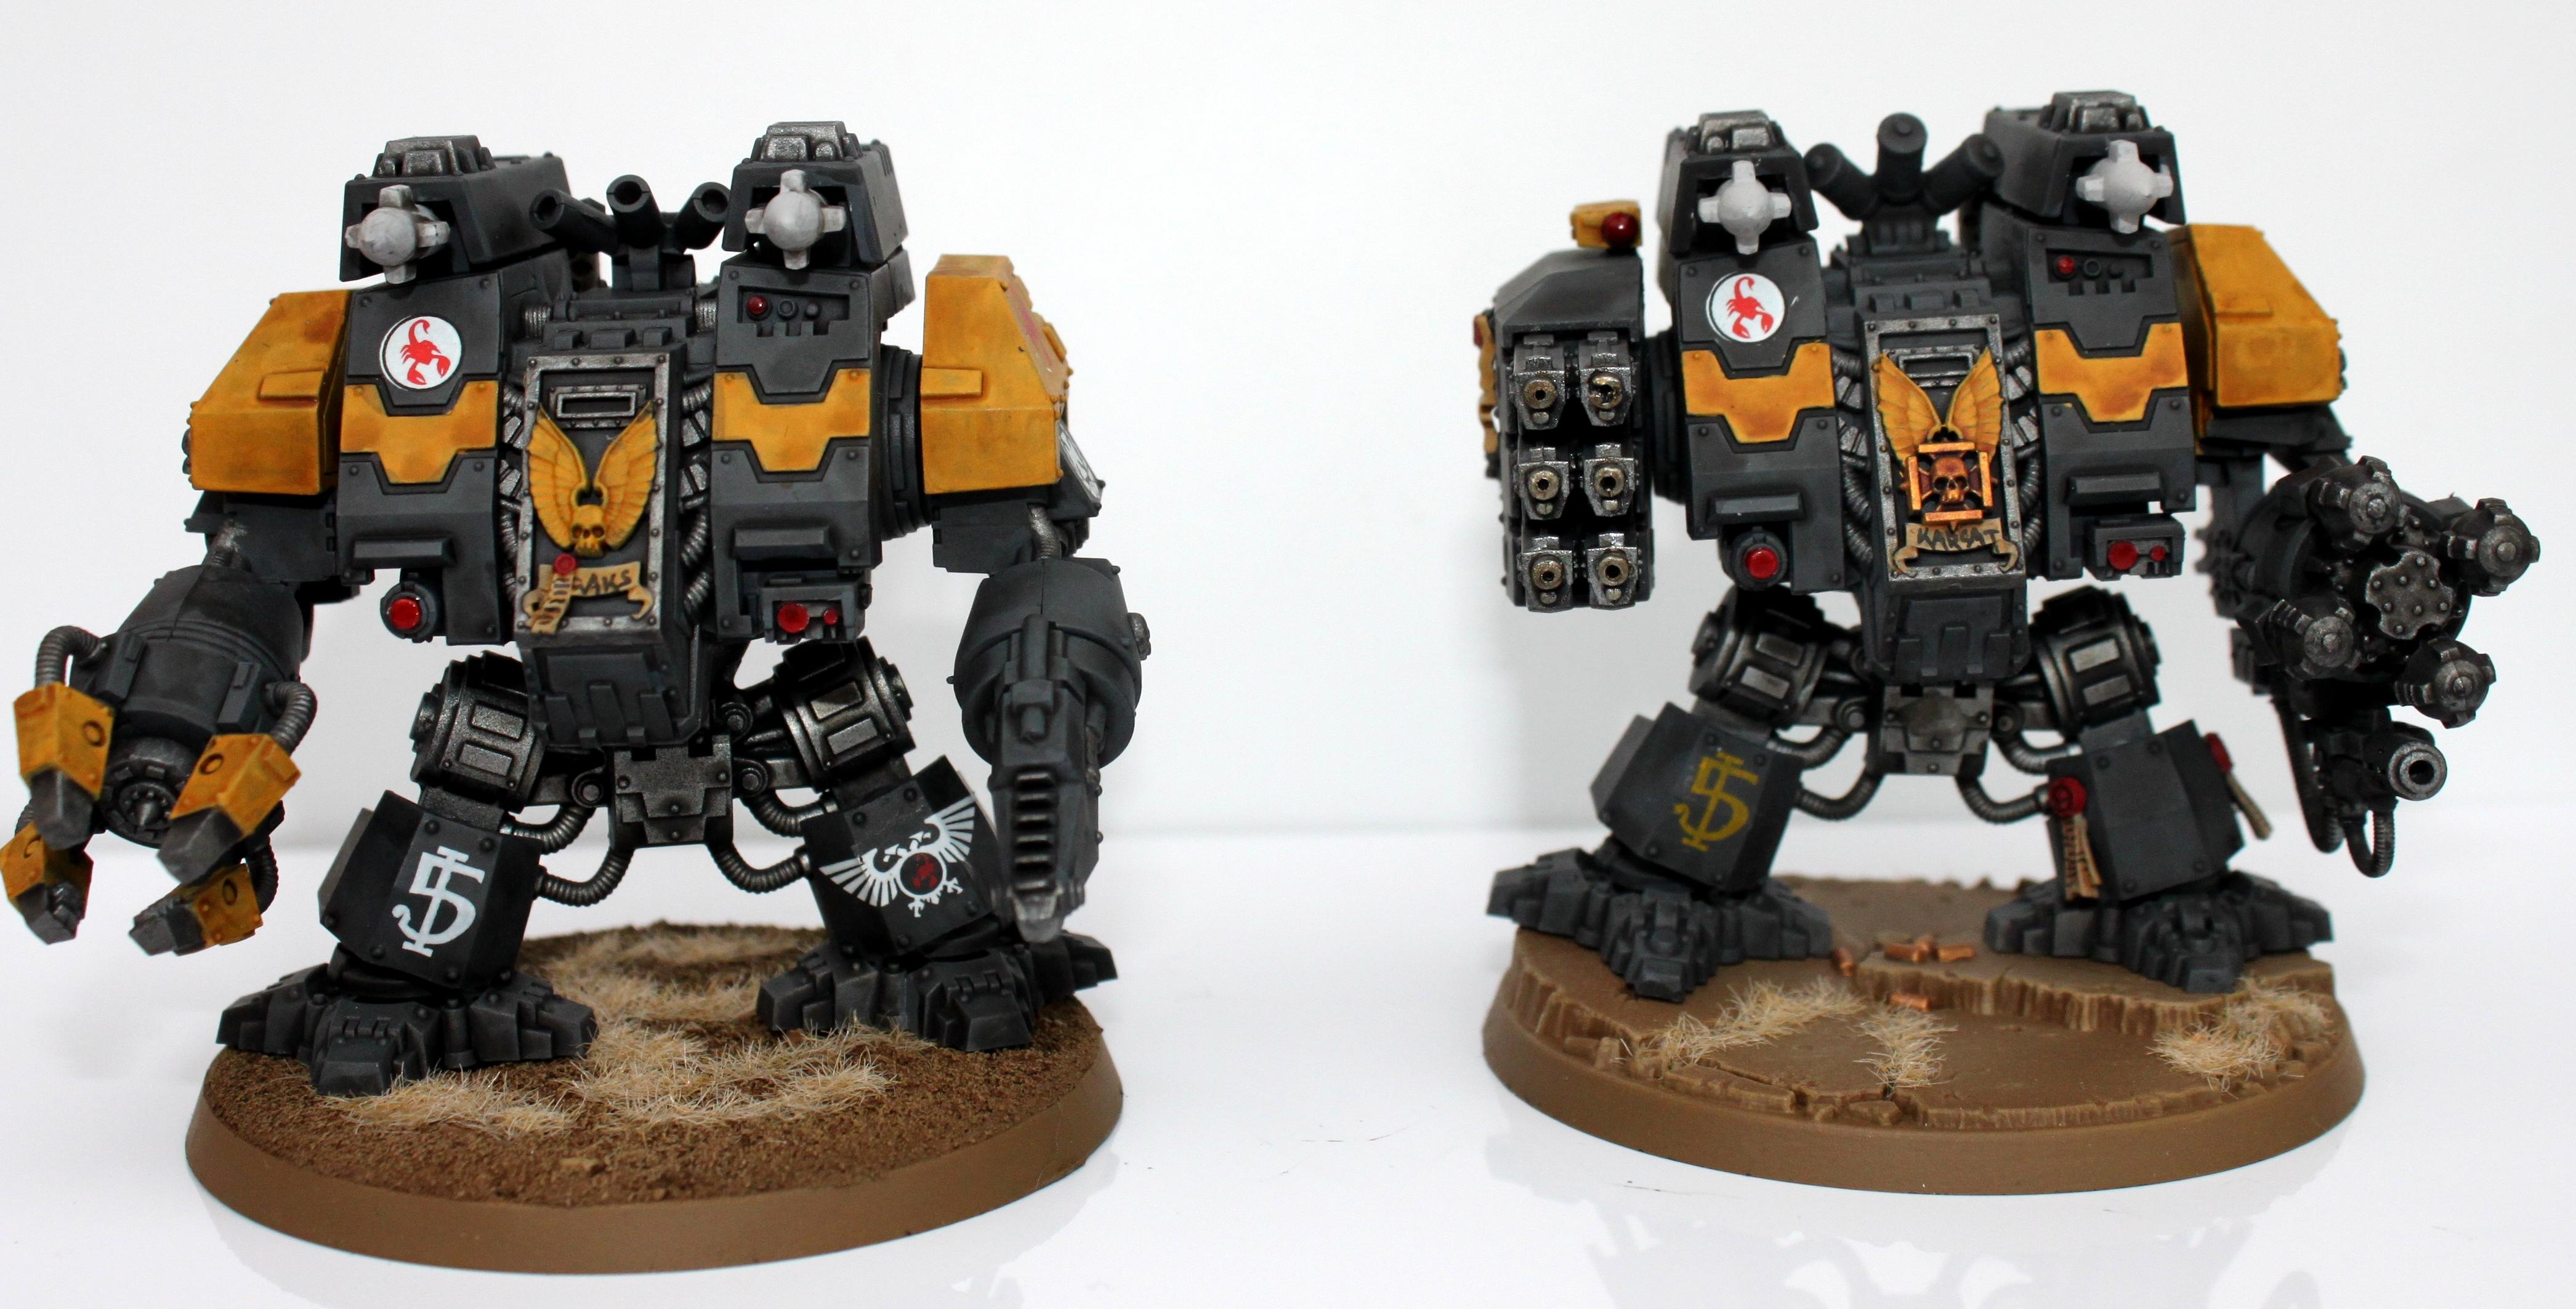 Ironclad Dreadnought, Red Scorpions, Space Marines. Warhammer 40k